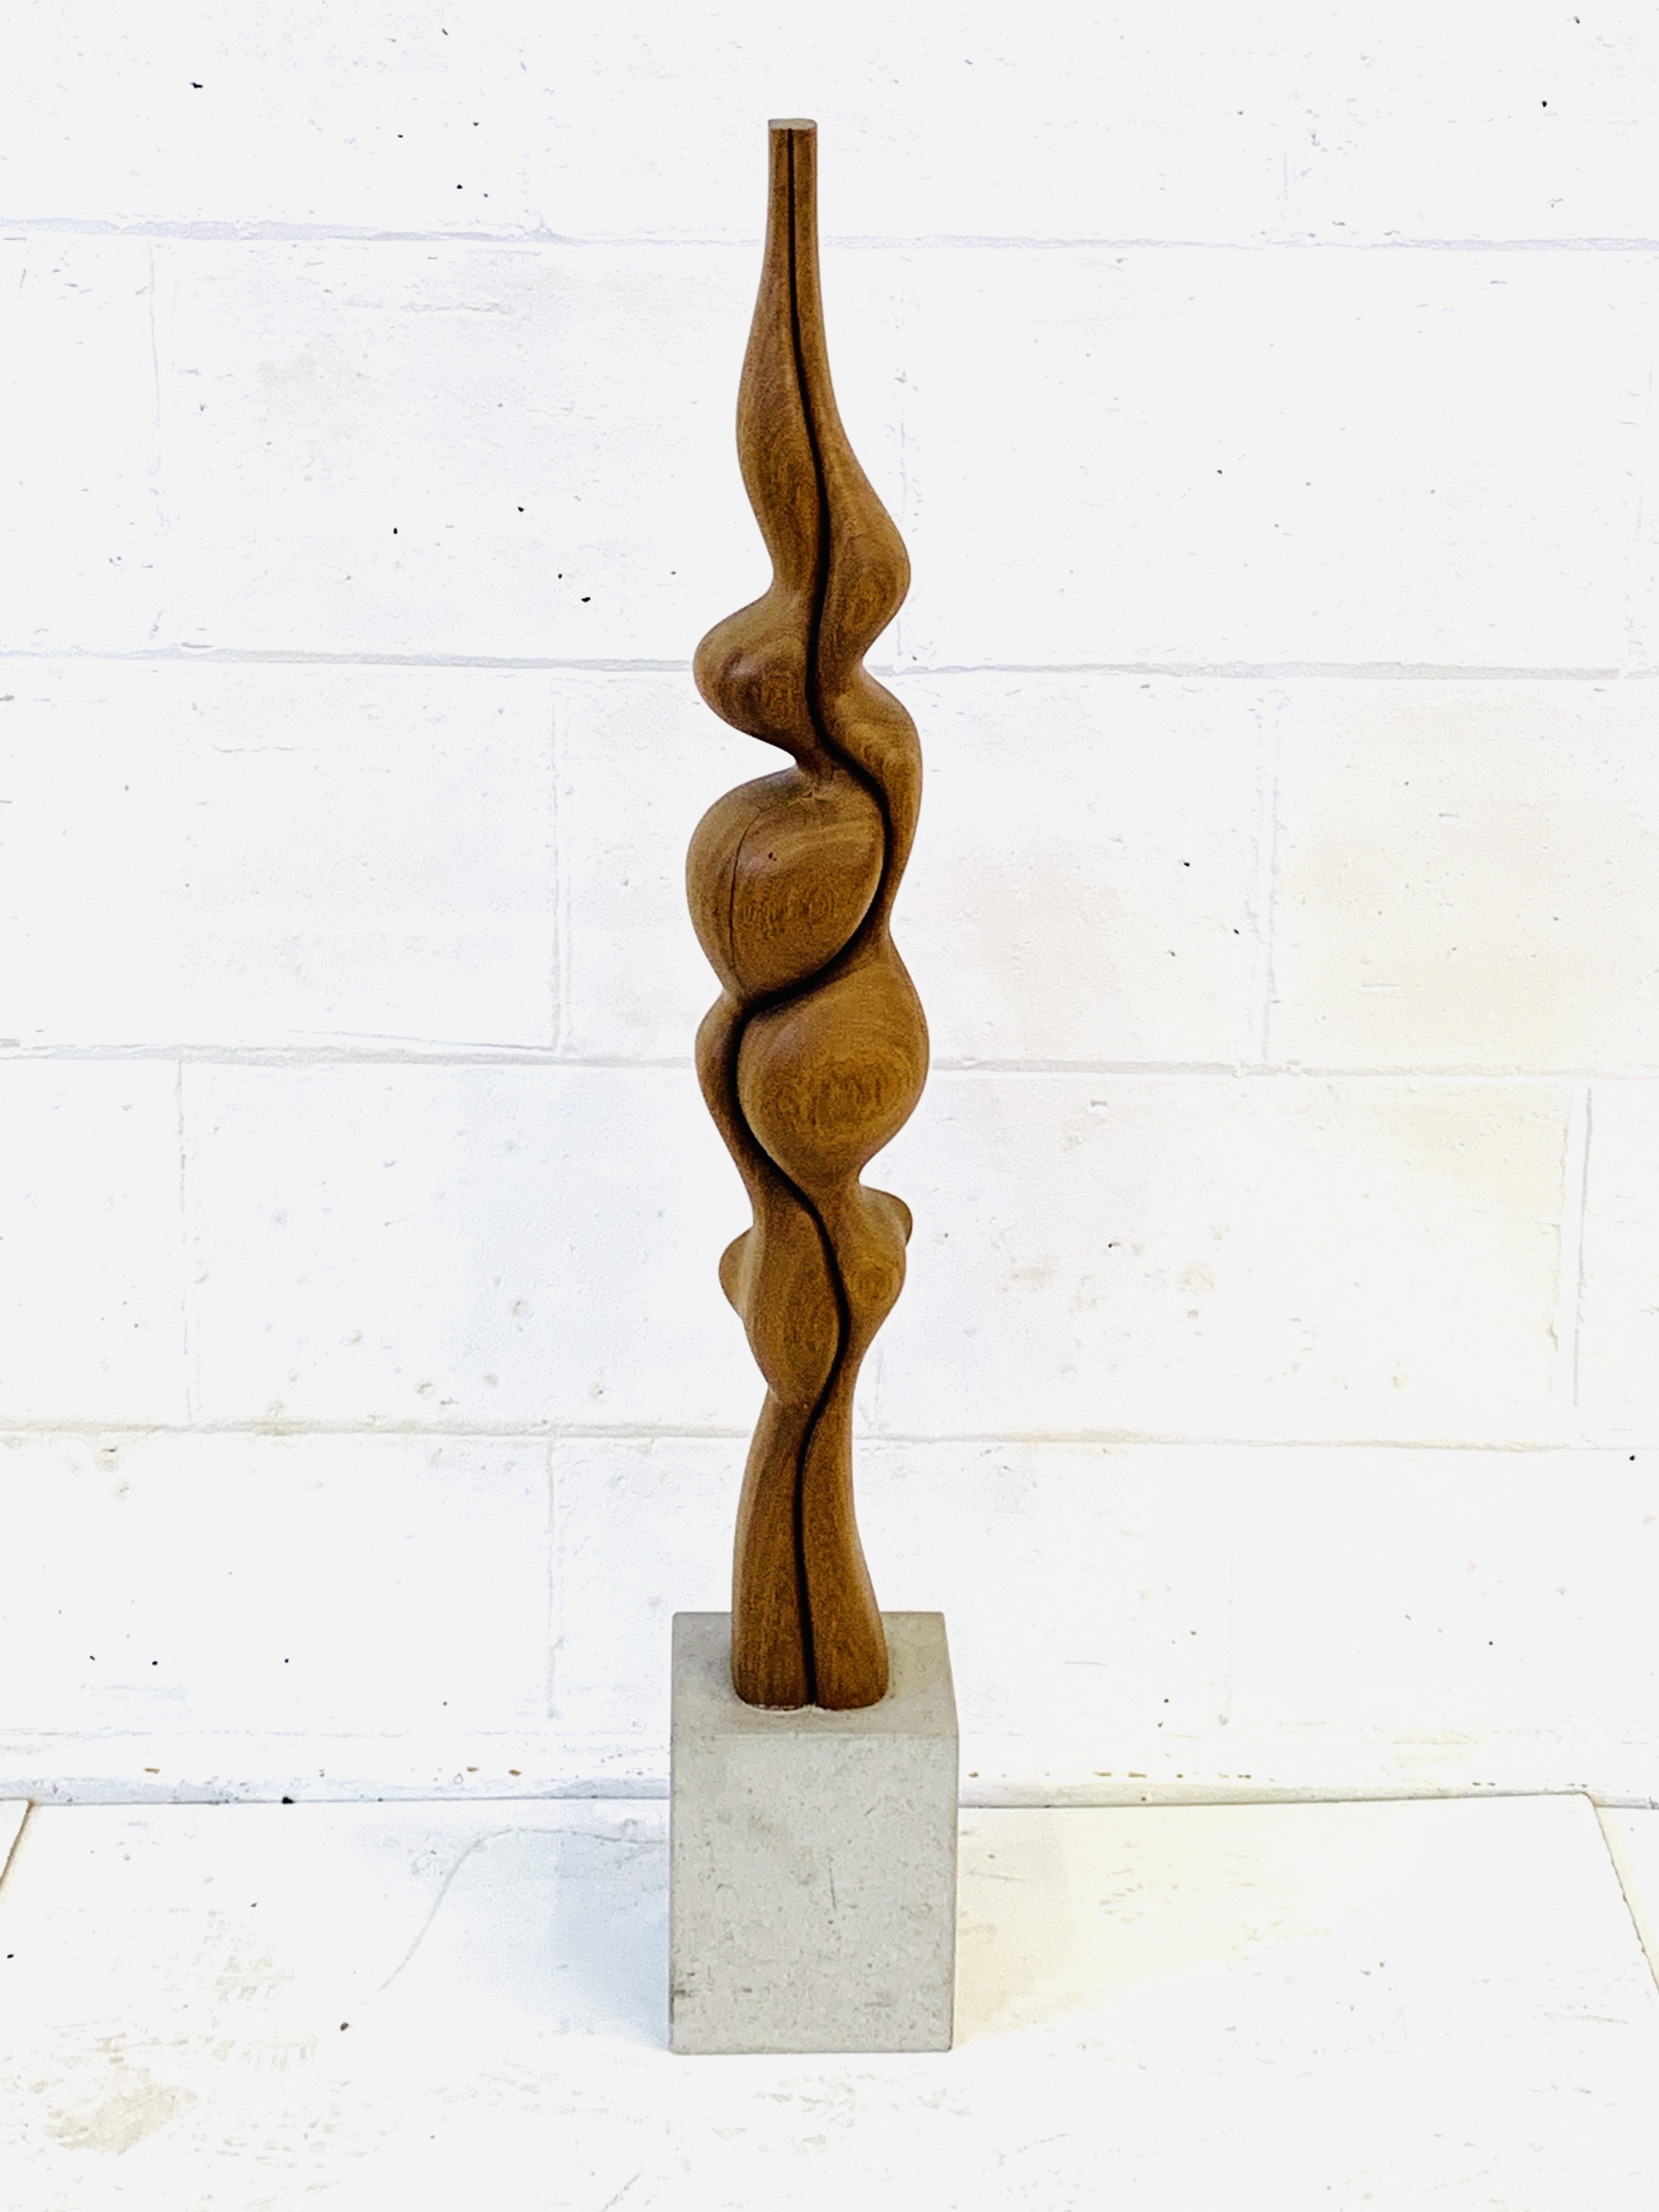 Abstract wood sculpture